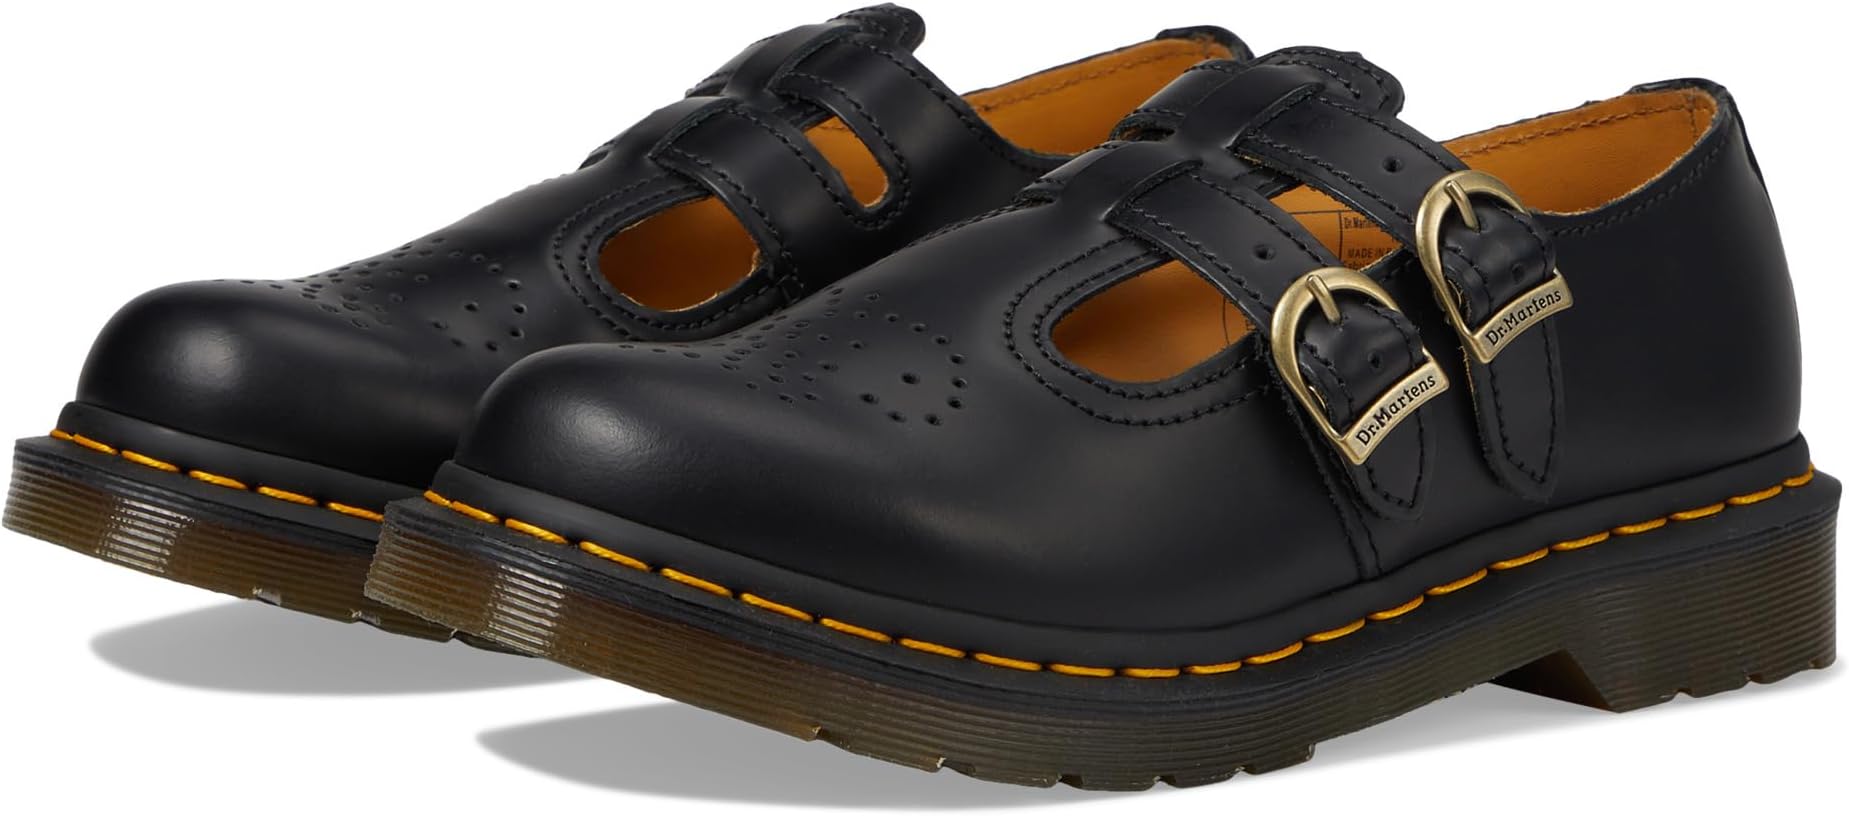 Лоферы 8065 Smooth Leather Mary Jane Shoes Dr. Martens, цвет Black Smooth оксфорды dr martens 1461 smooth leather shoes цвет card blue smooth